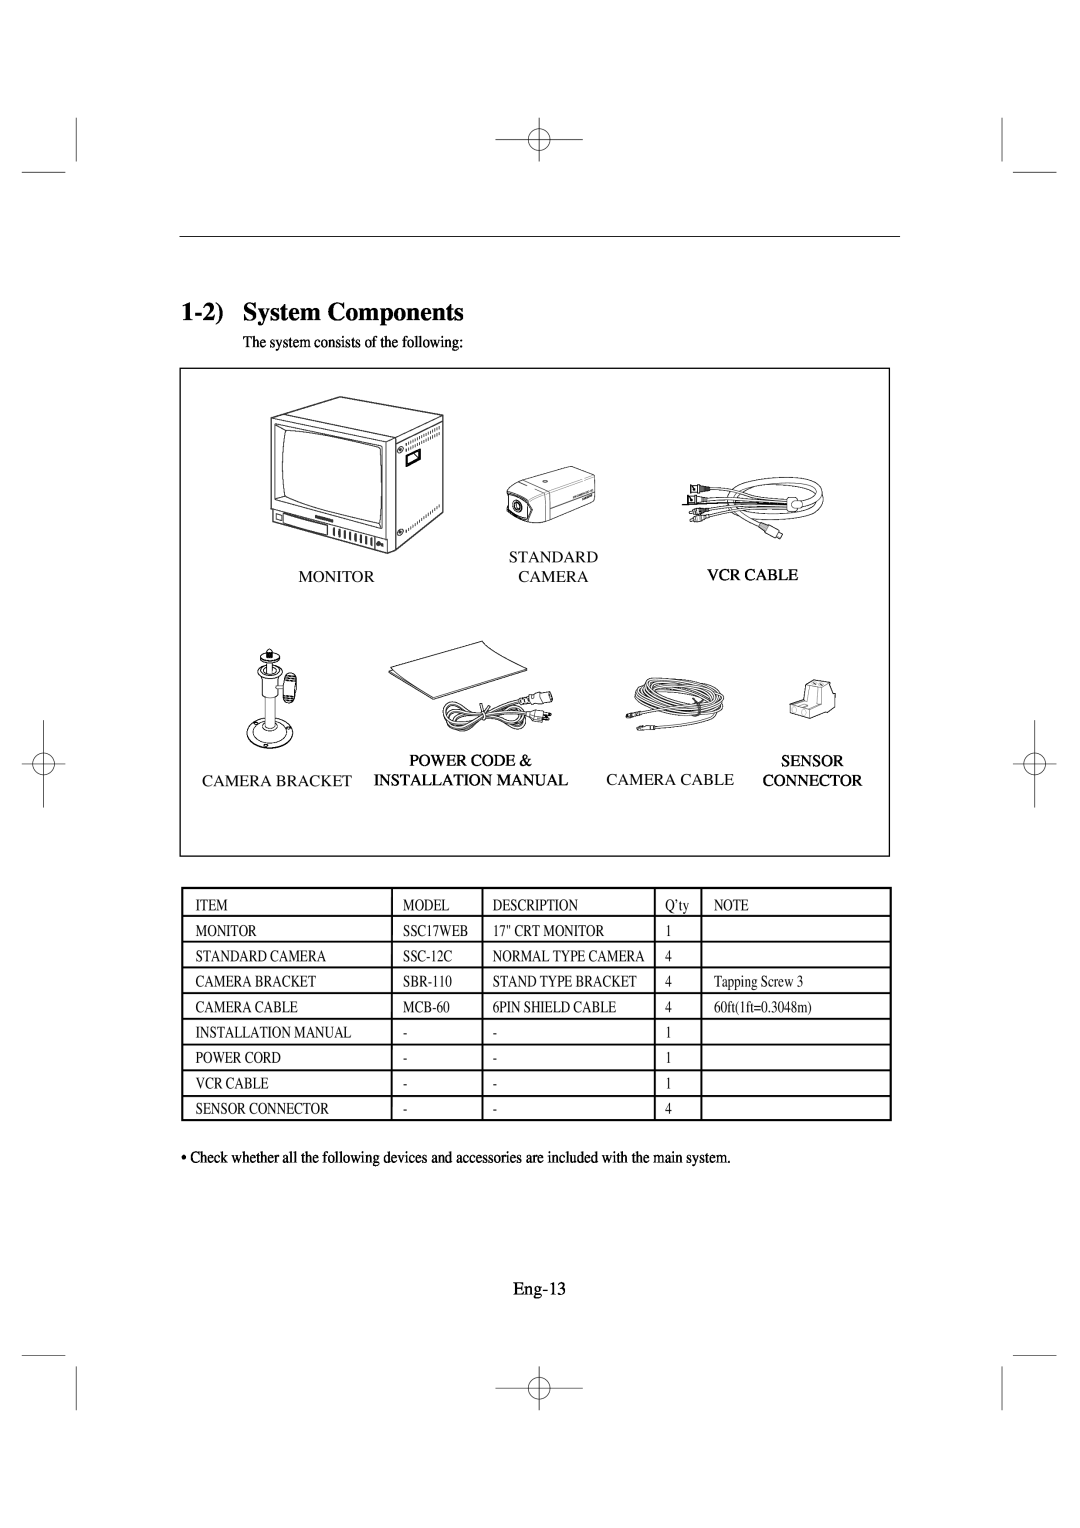 Samsung SSC17WEB manual 1-2System Components, Eng-13 